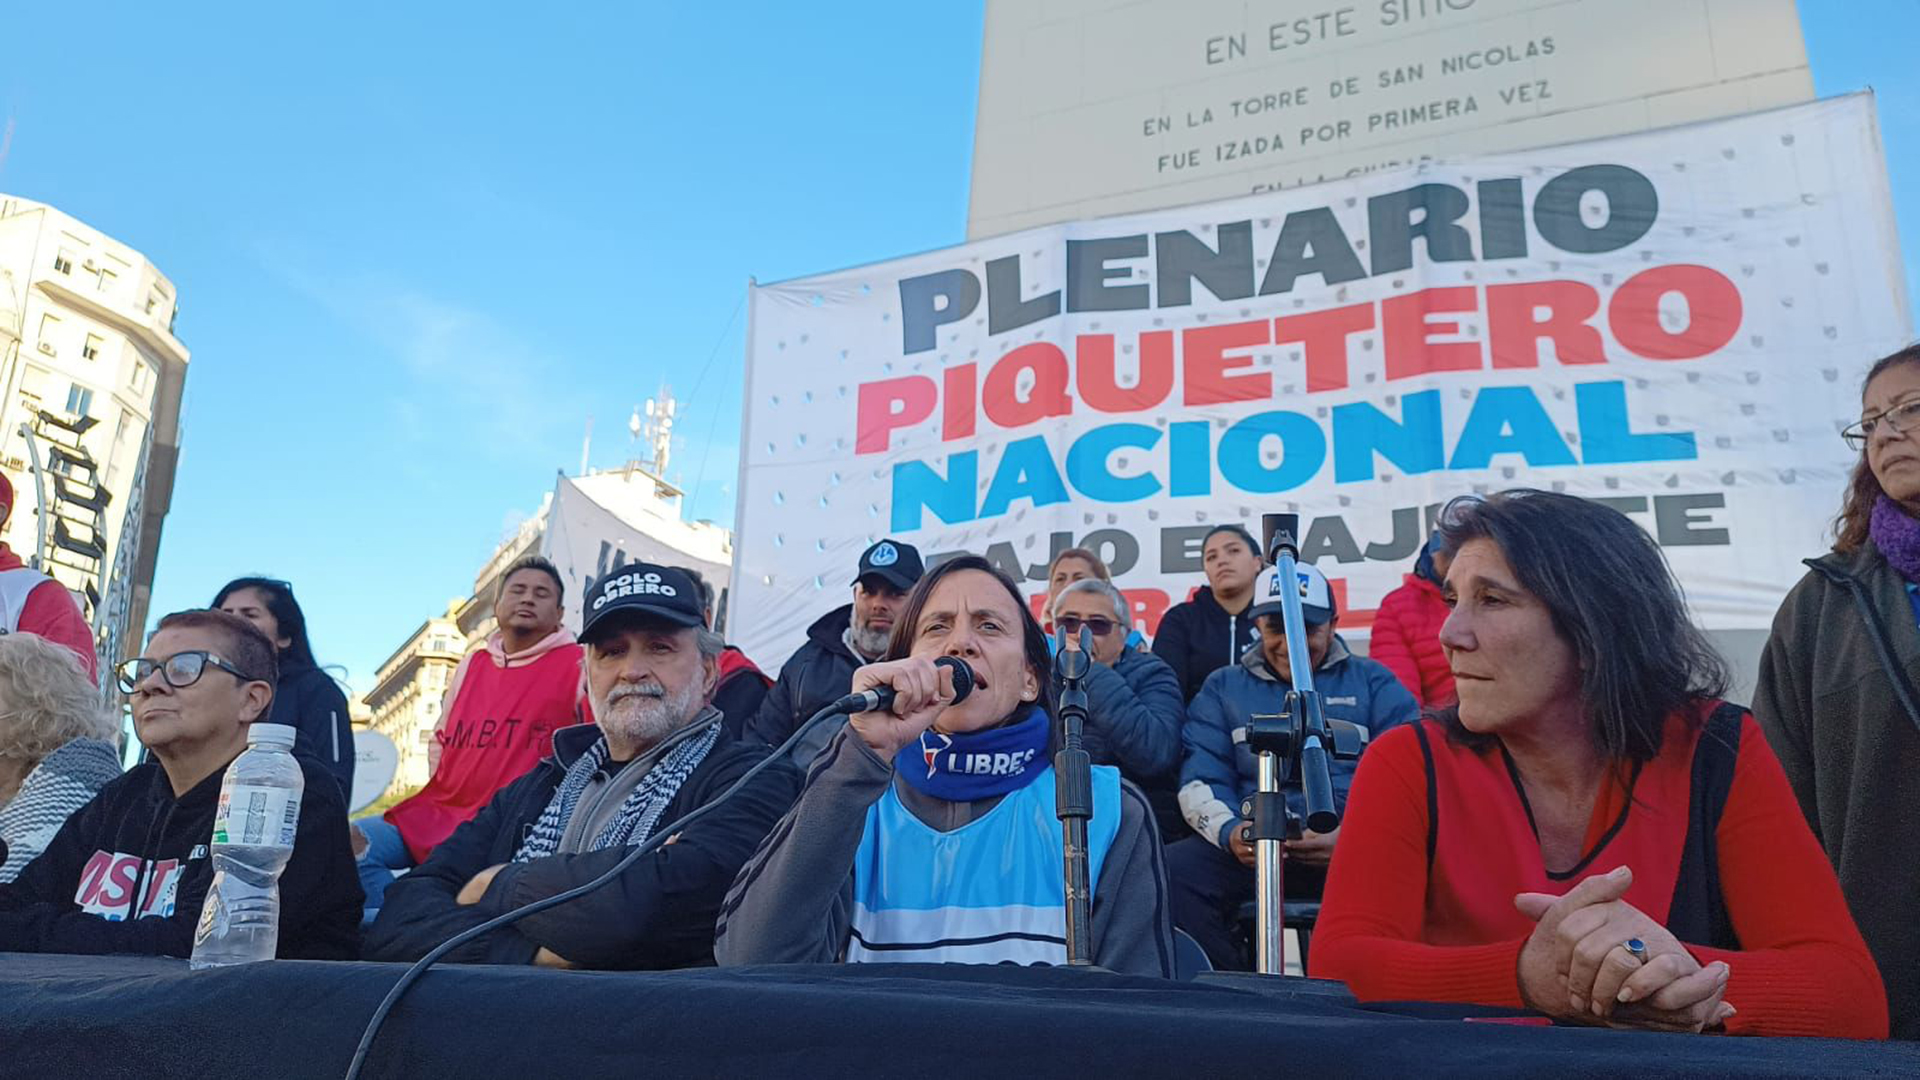 The Piquetero Unit will announce on Friday, from the Obelisk of Buenos Aires, the vote on a new plan of struggle on March 3 in Plaza de Mayo